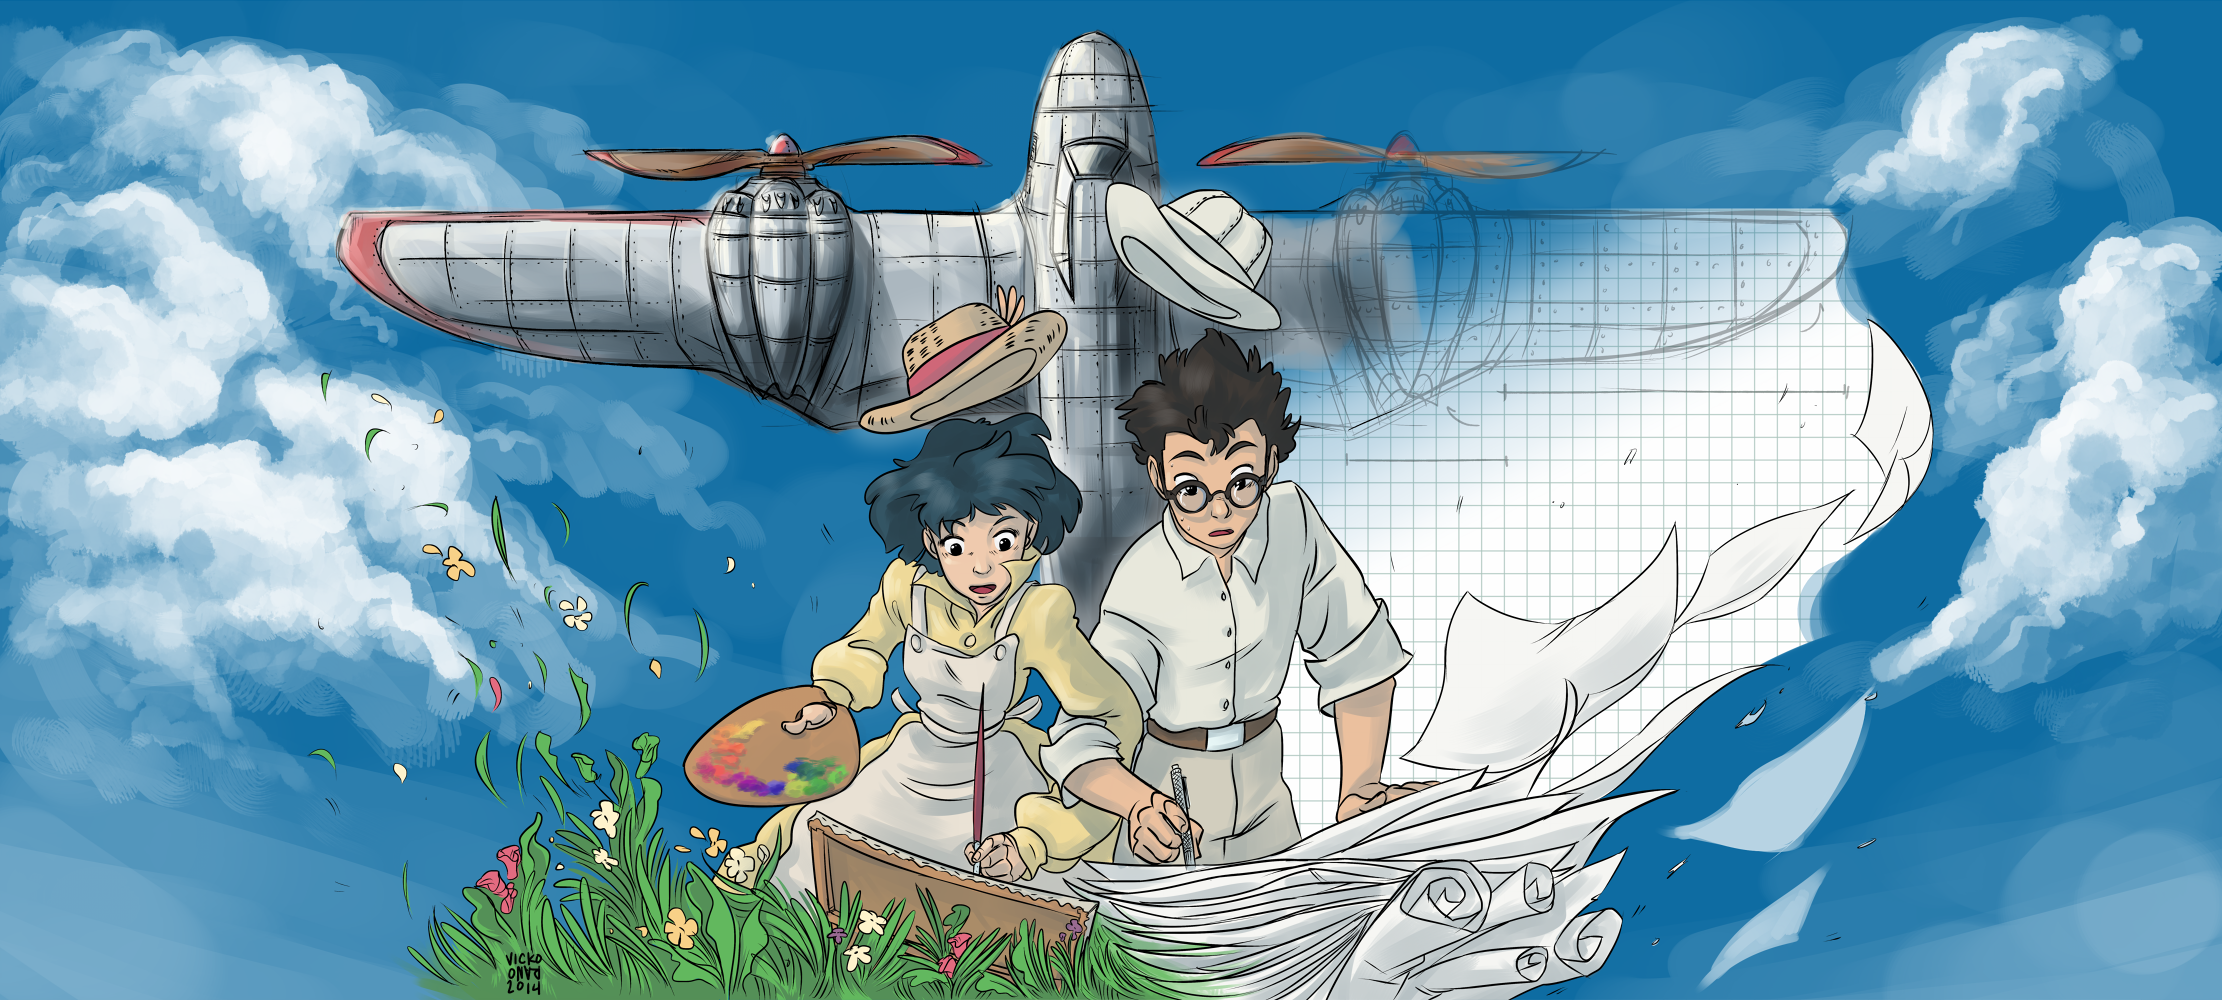 HQ The Wind Rises Wallpapers | File 2265.97Kb